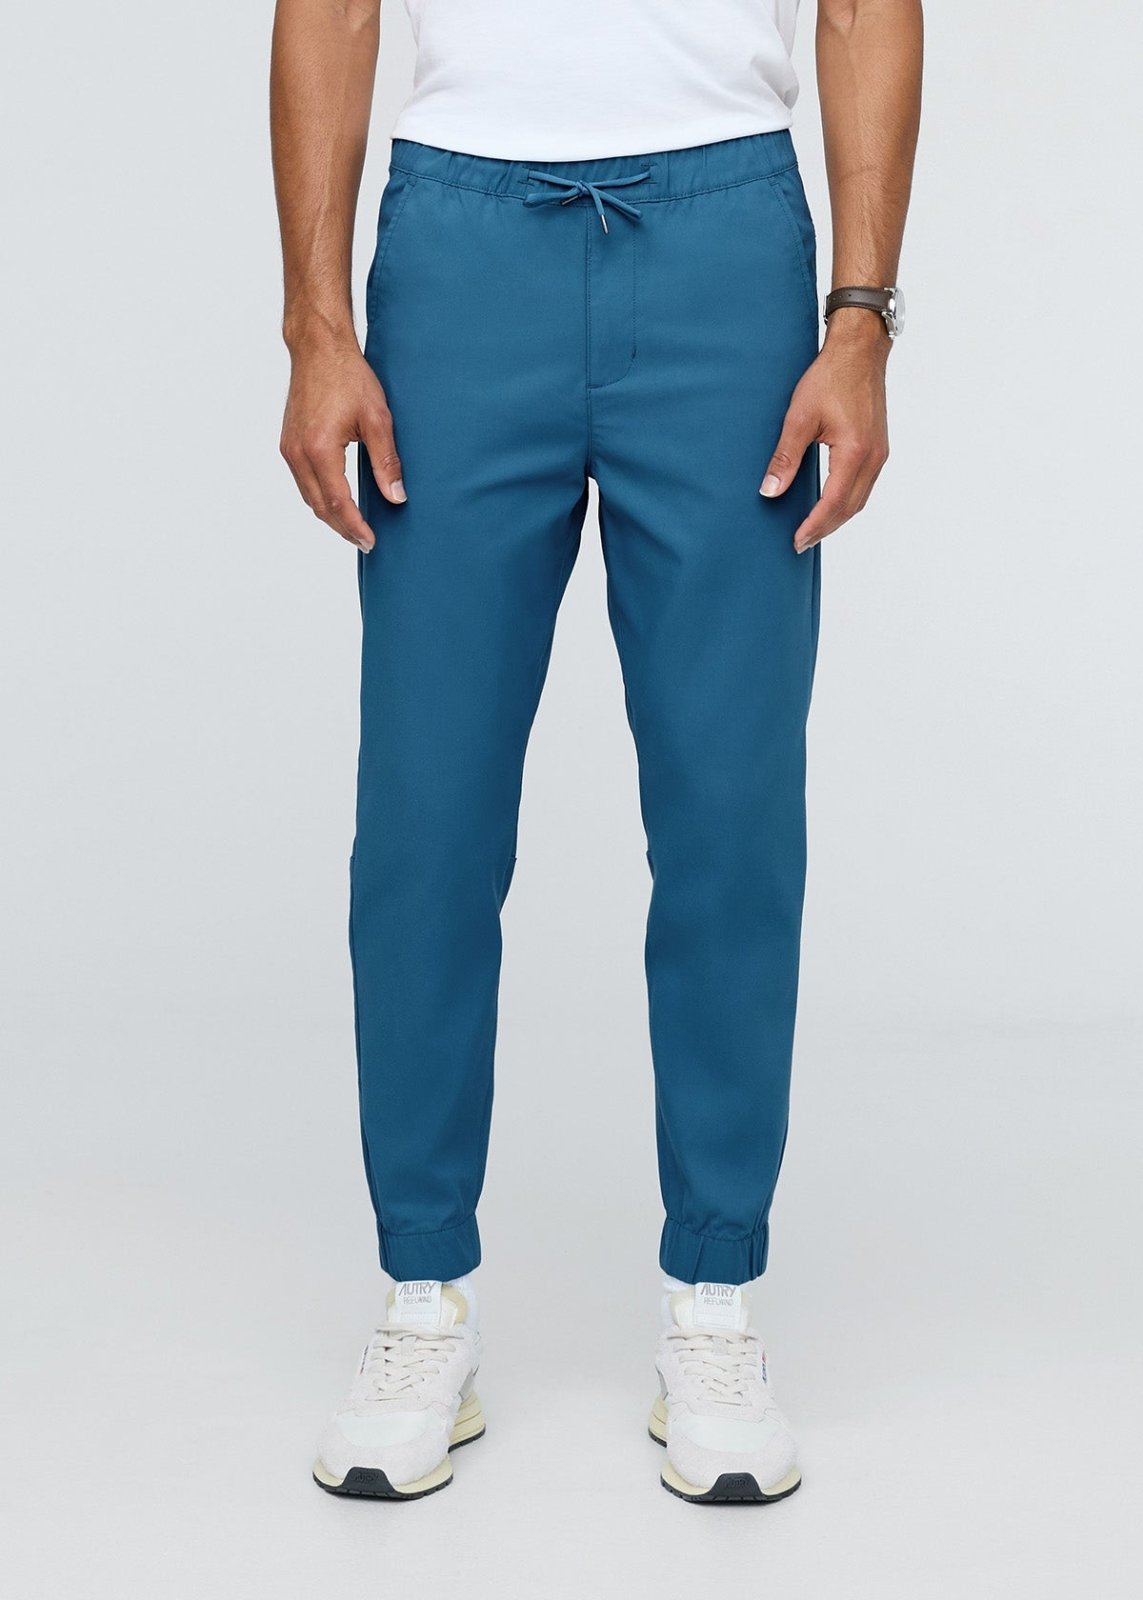 mens blue athleisure jogger front